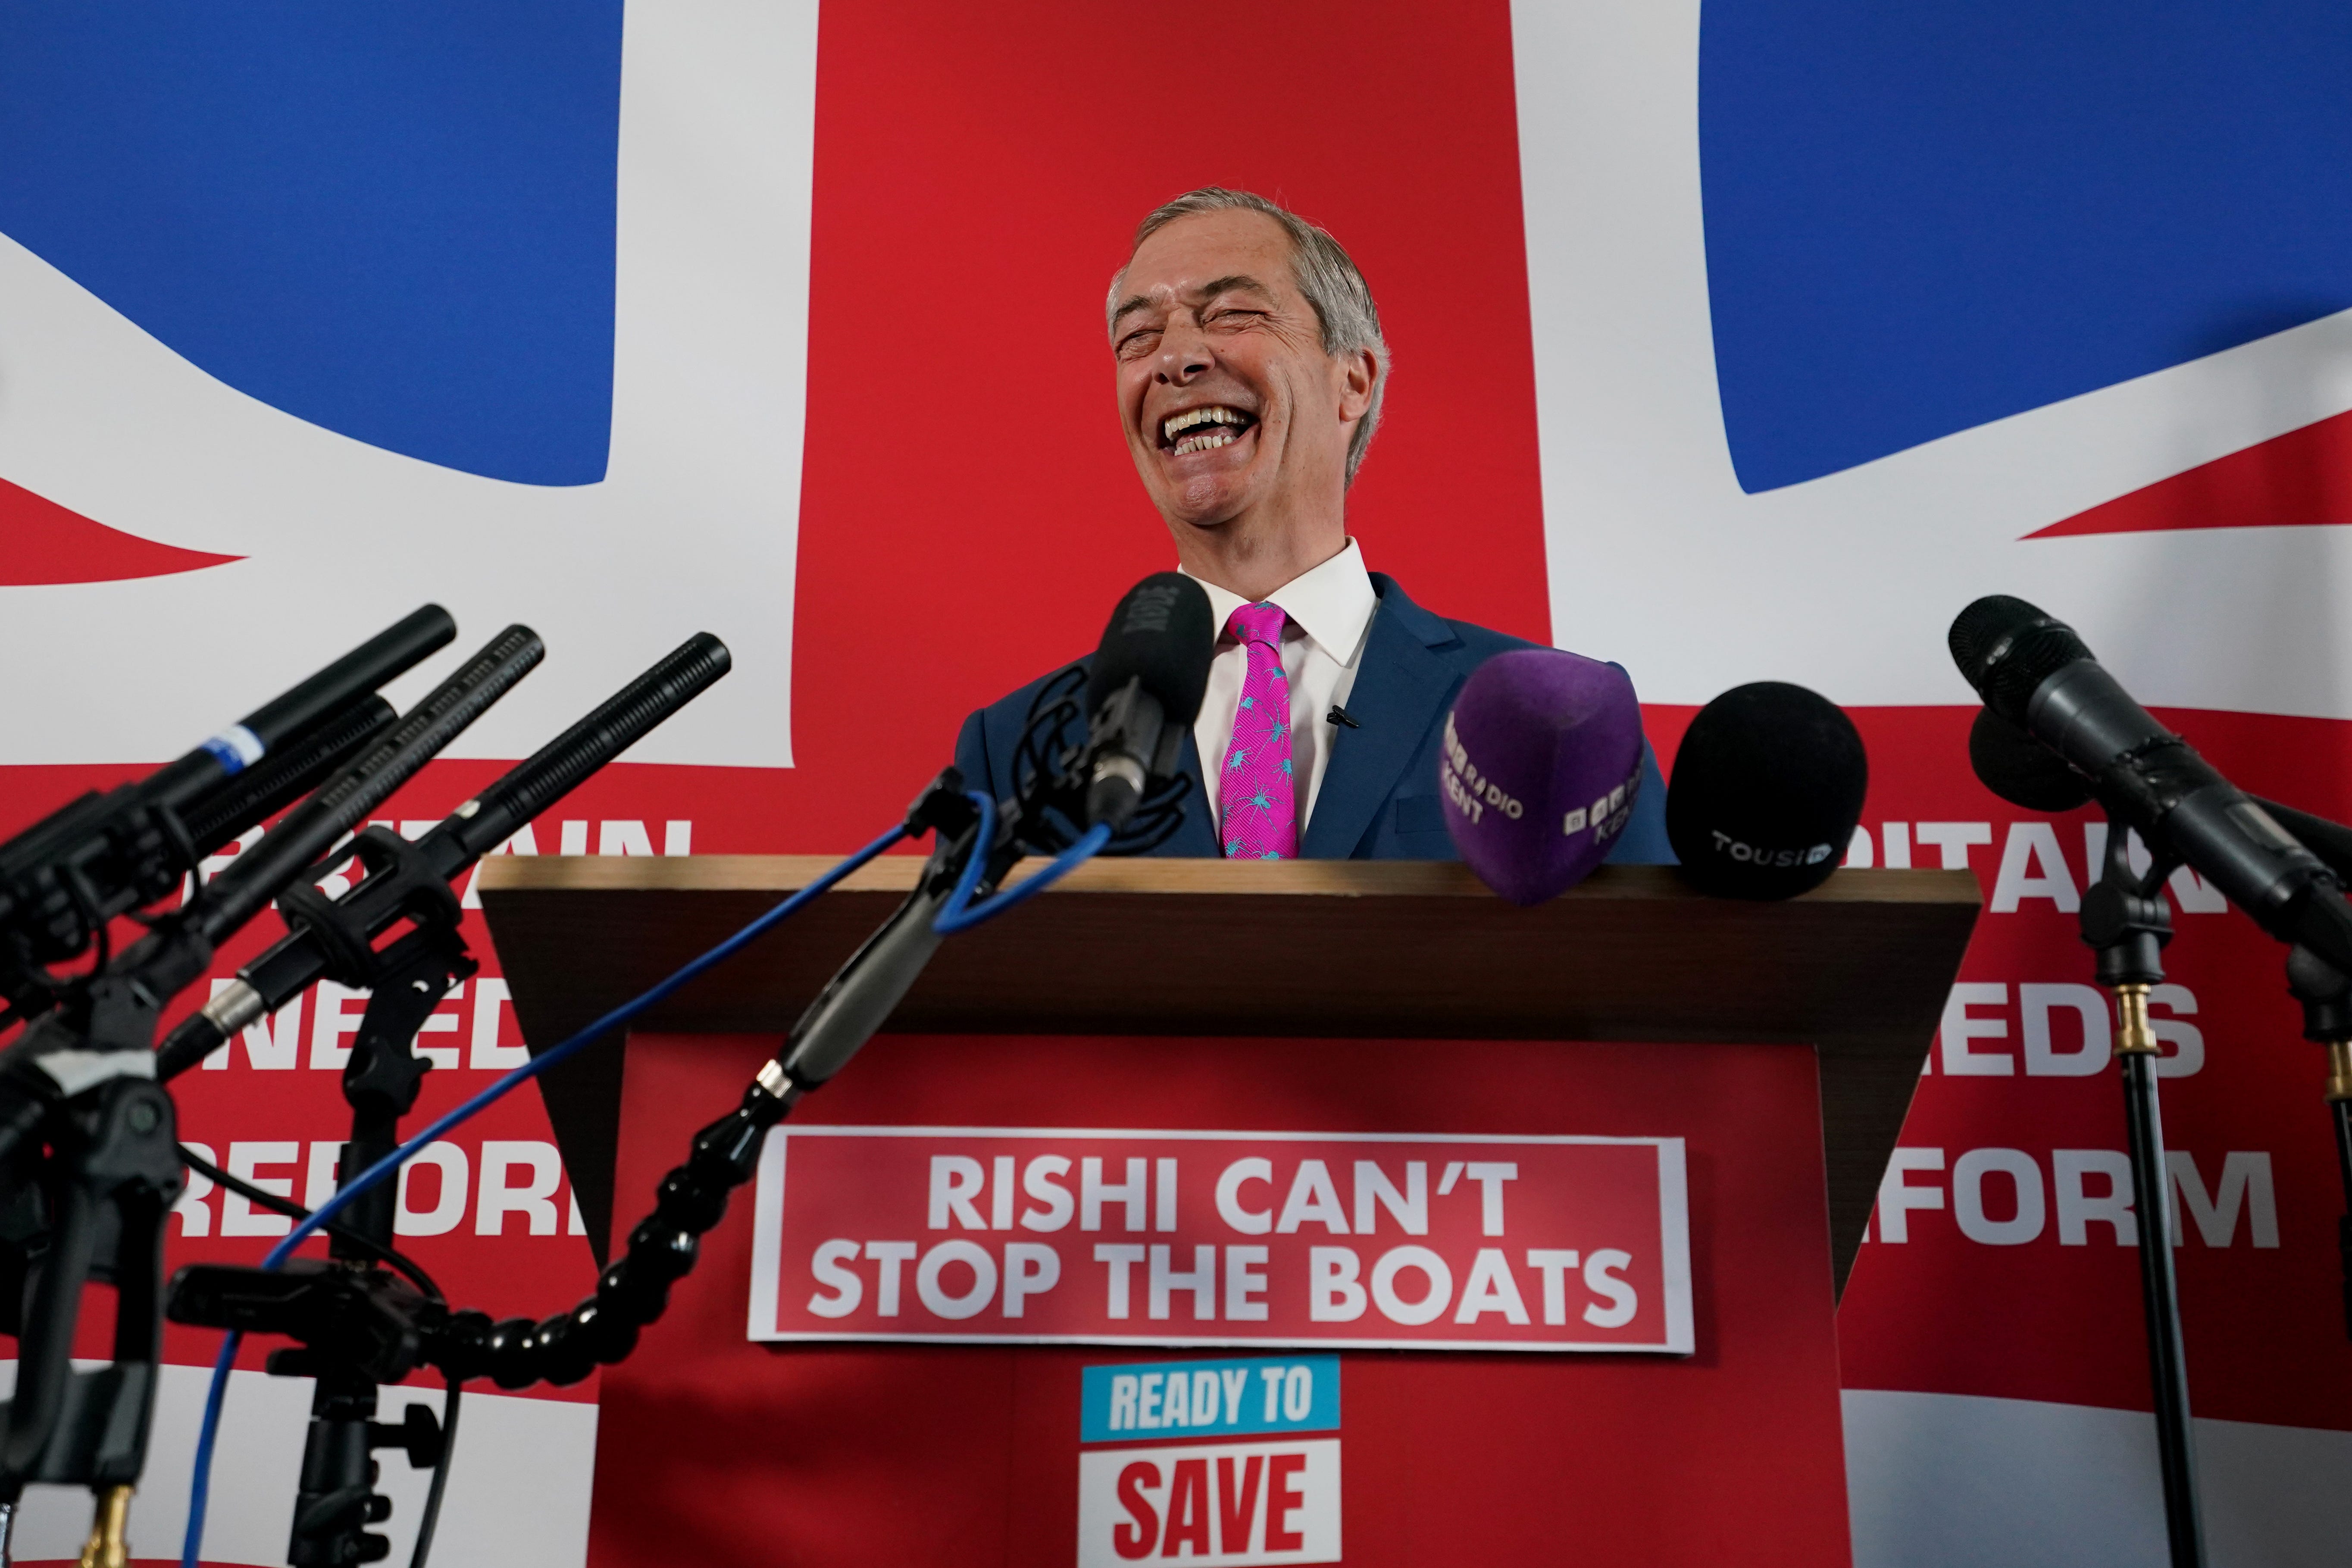 Nigel Farage described immigration as an ‘invasion’ while on the general election campaign trail